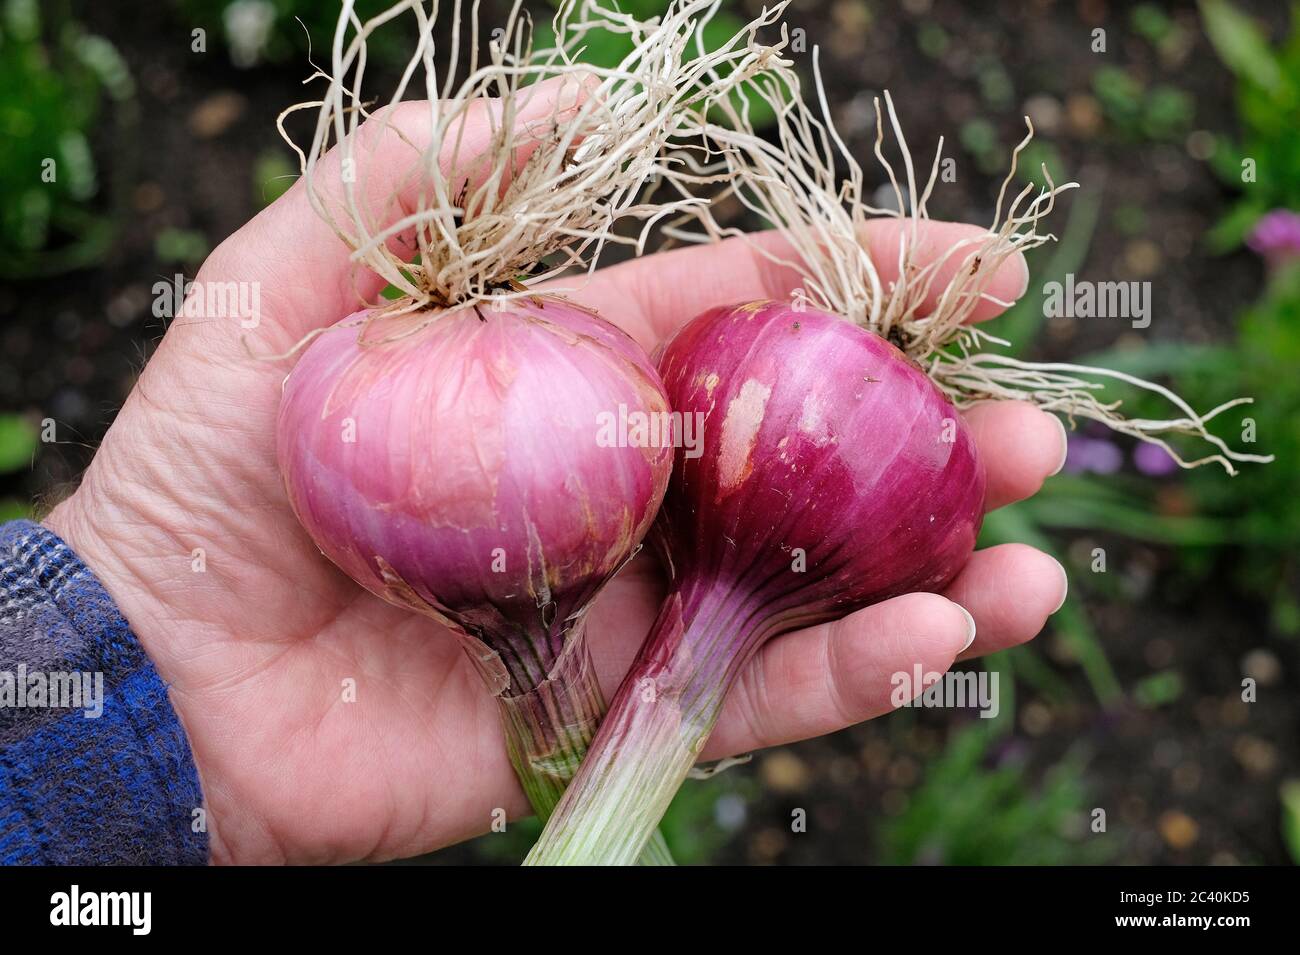 male hand holding two red onions in garden, norfolk, england Stock Photo